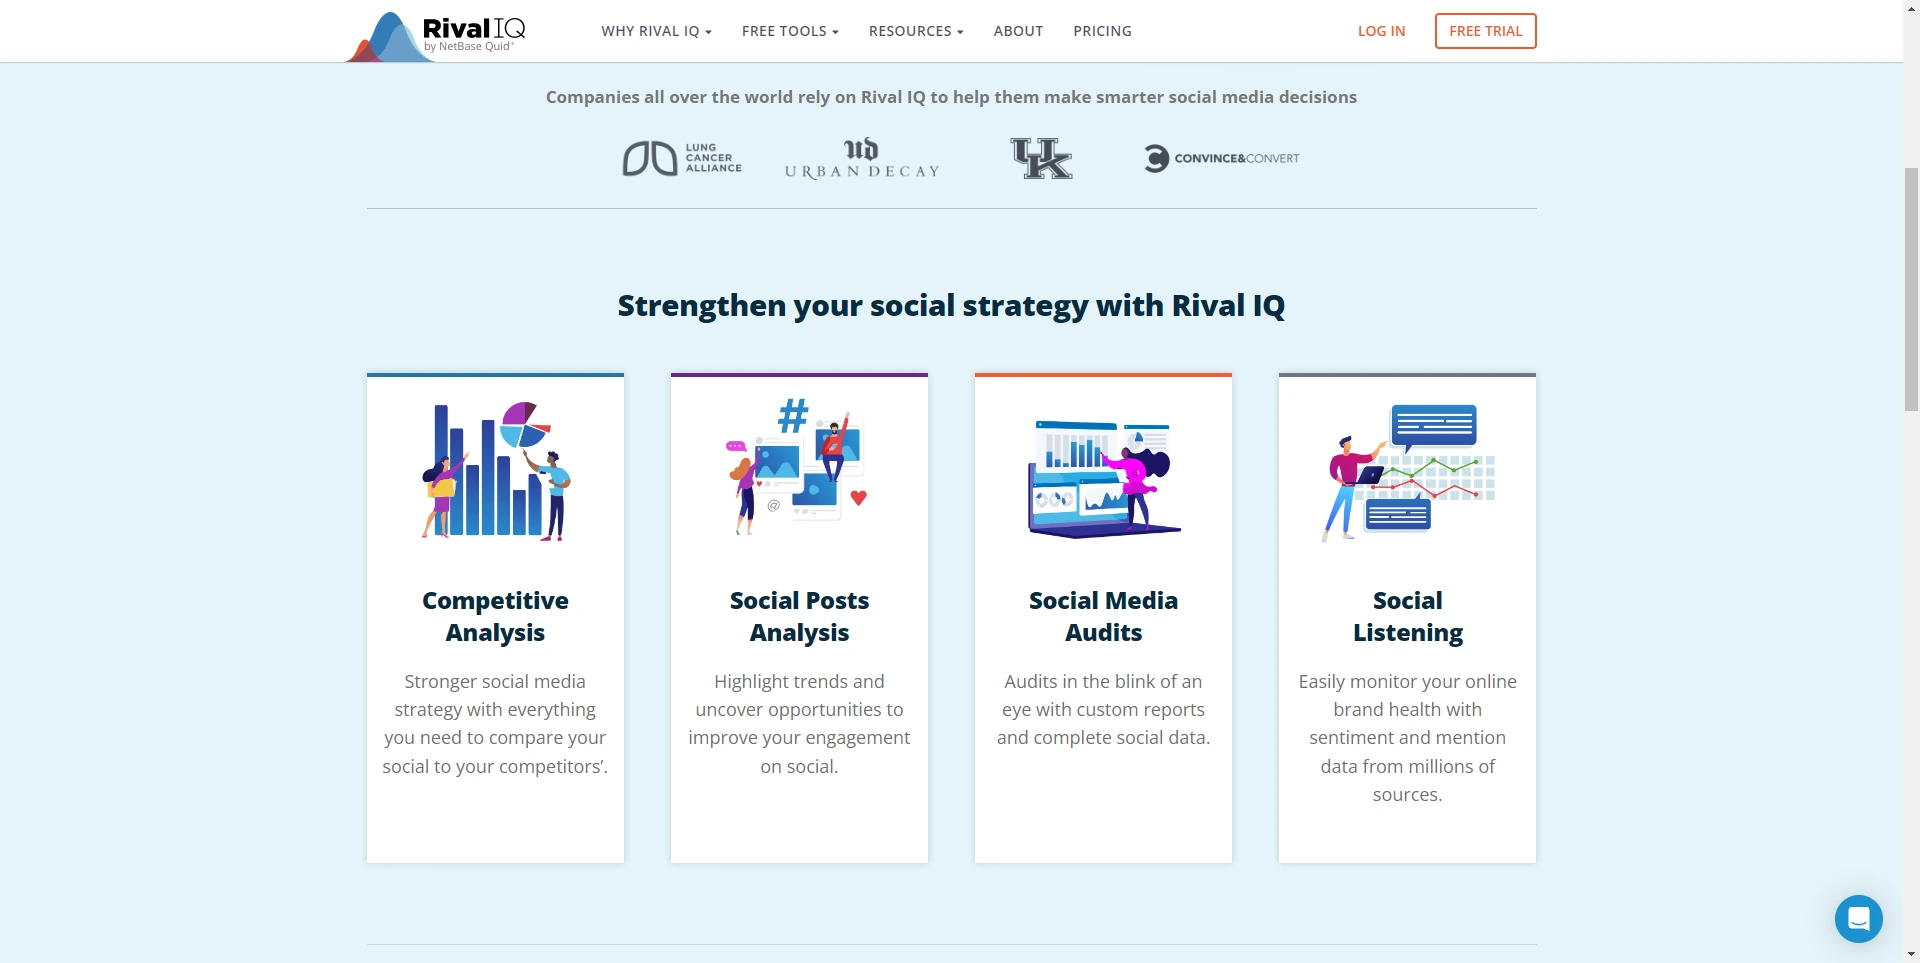 Overview of Rival IQ's competitive analysis, social post analysis, social media audits, and social listening features